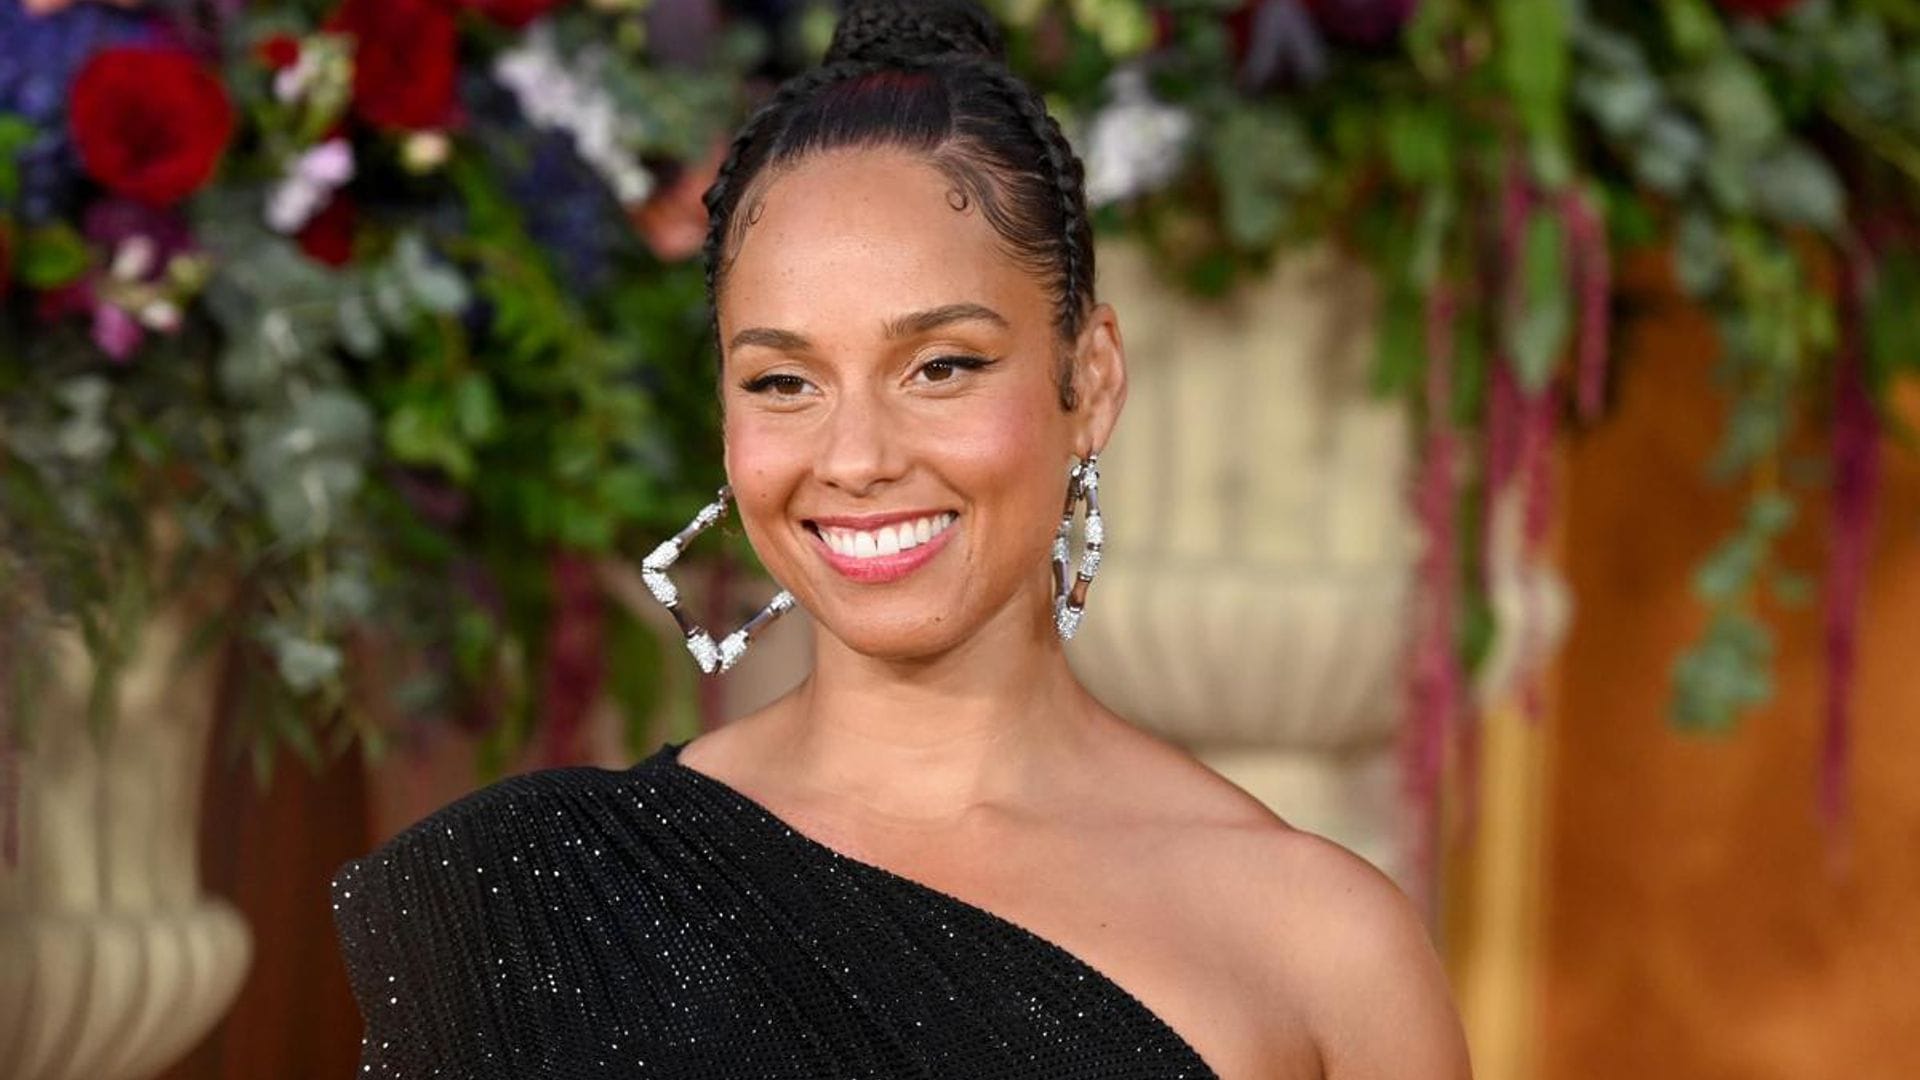 Alicia Keys rides a hot air balloon and visits Aztec ruins in Mexico before her concert